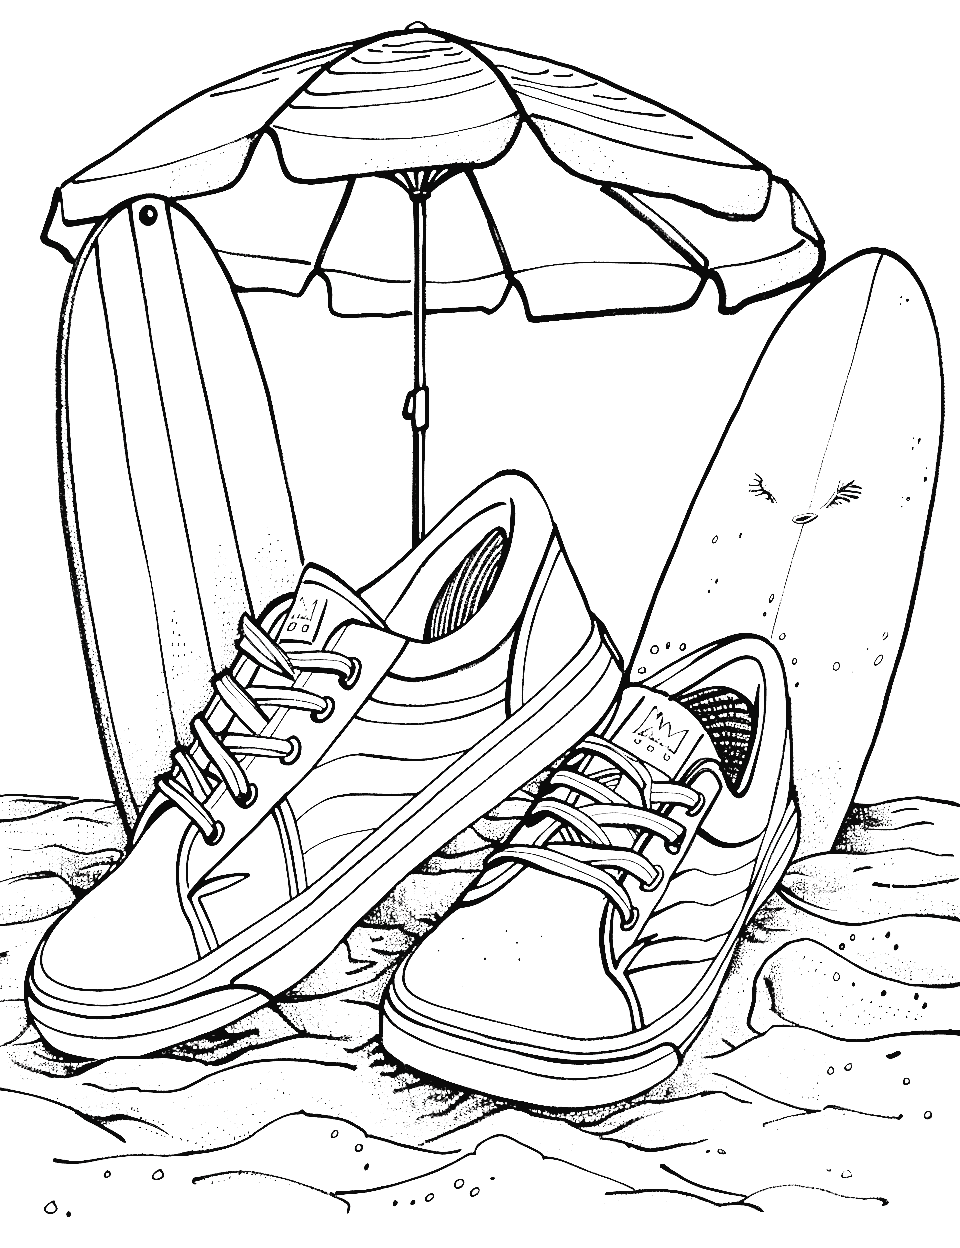 Surfing Shoes on the Beach Shoe Coloring Page - Water shoes with a surfboard and beach umbrella nearby.